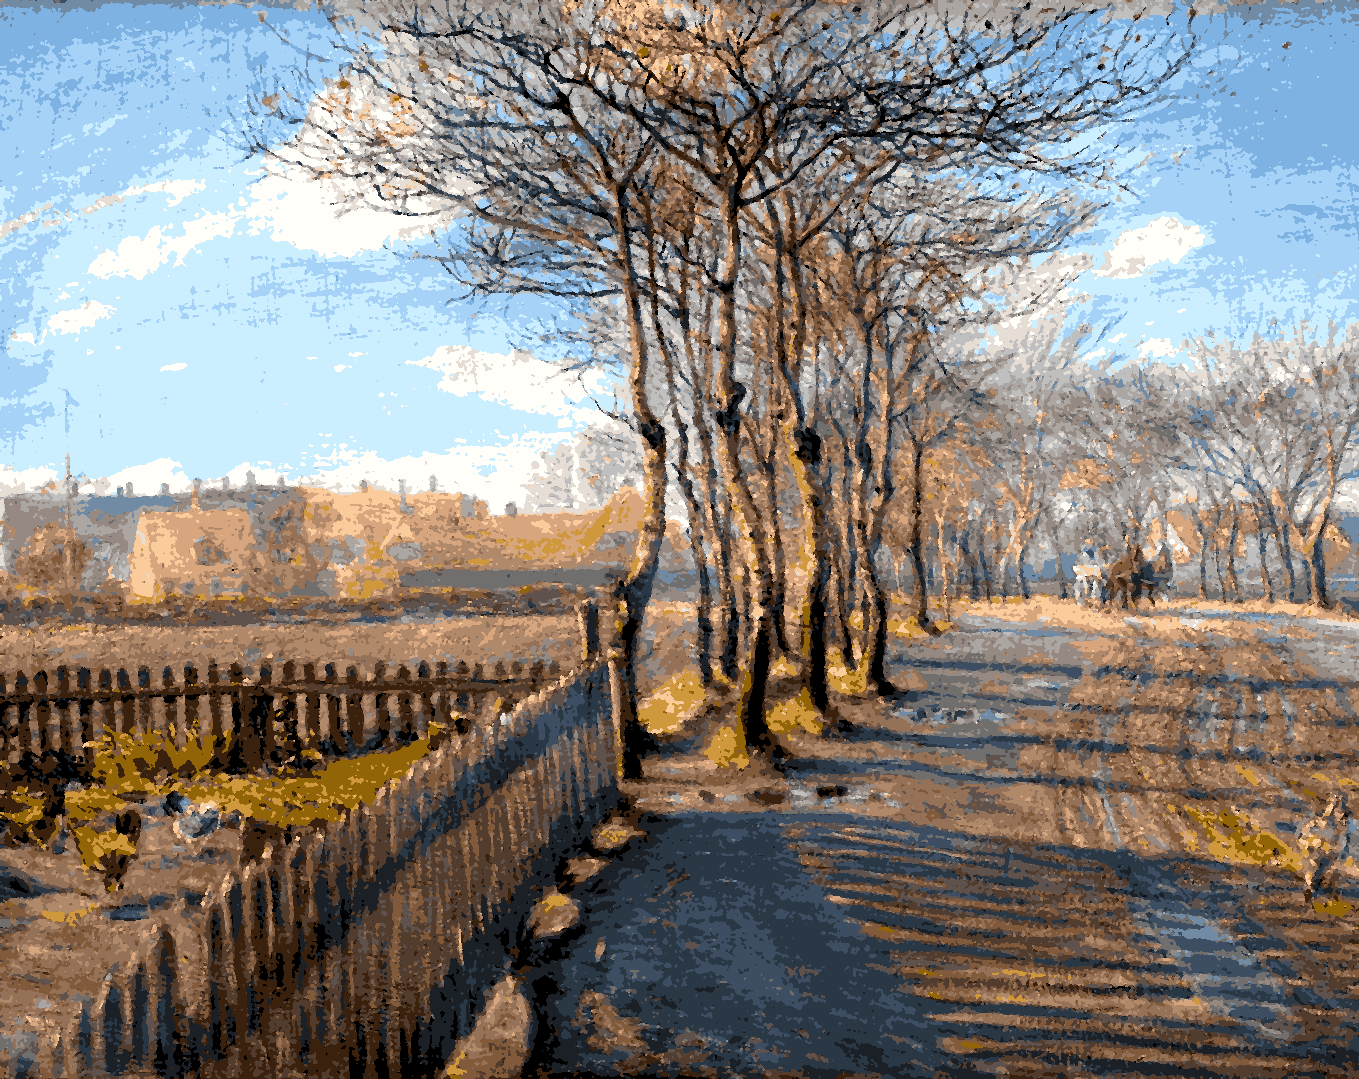 Country Lane with Trees by Theodor Philipsen - Van-Go Paint-By-Number